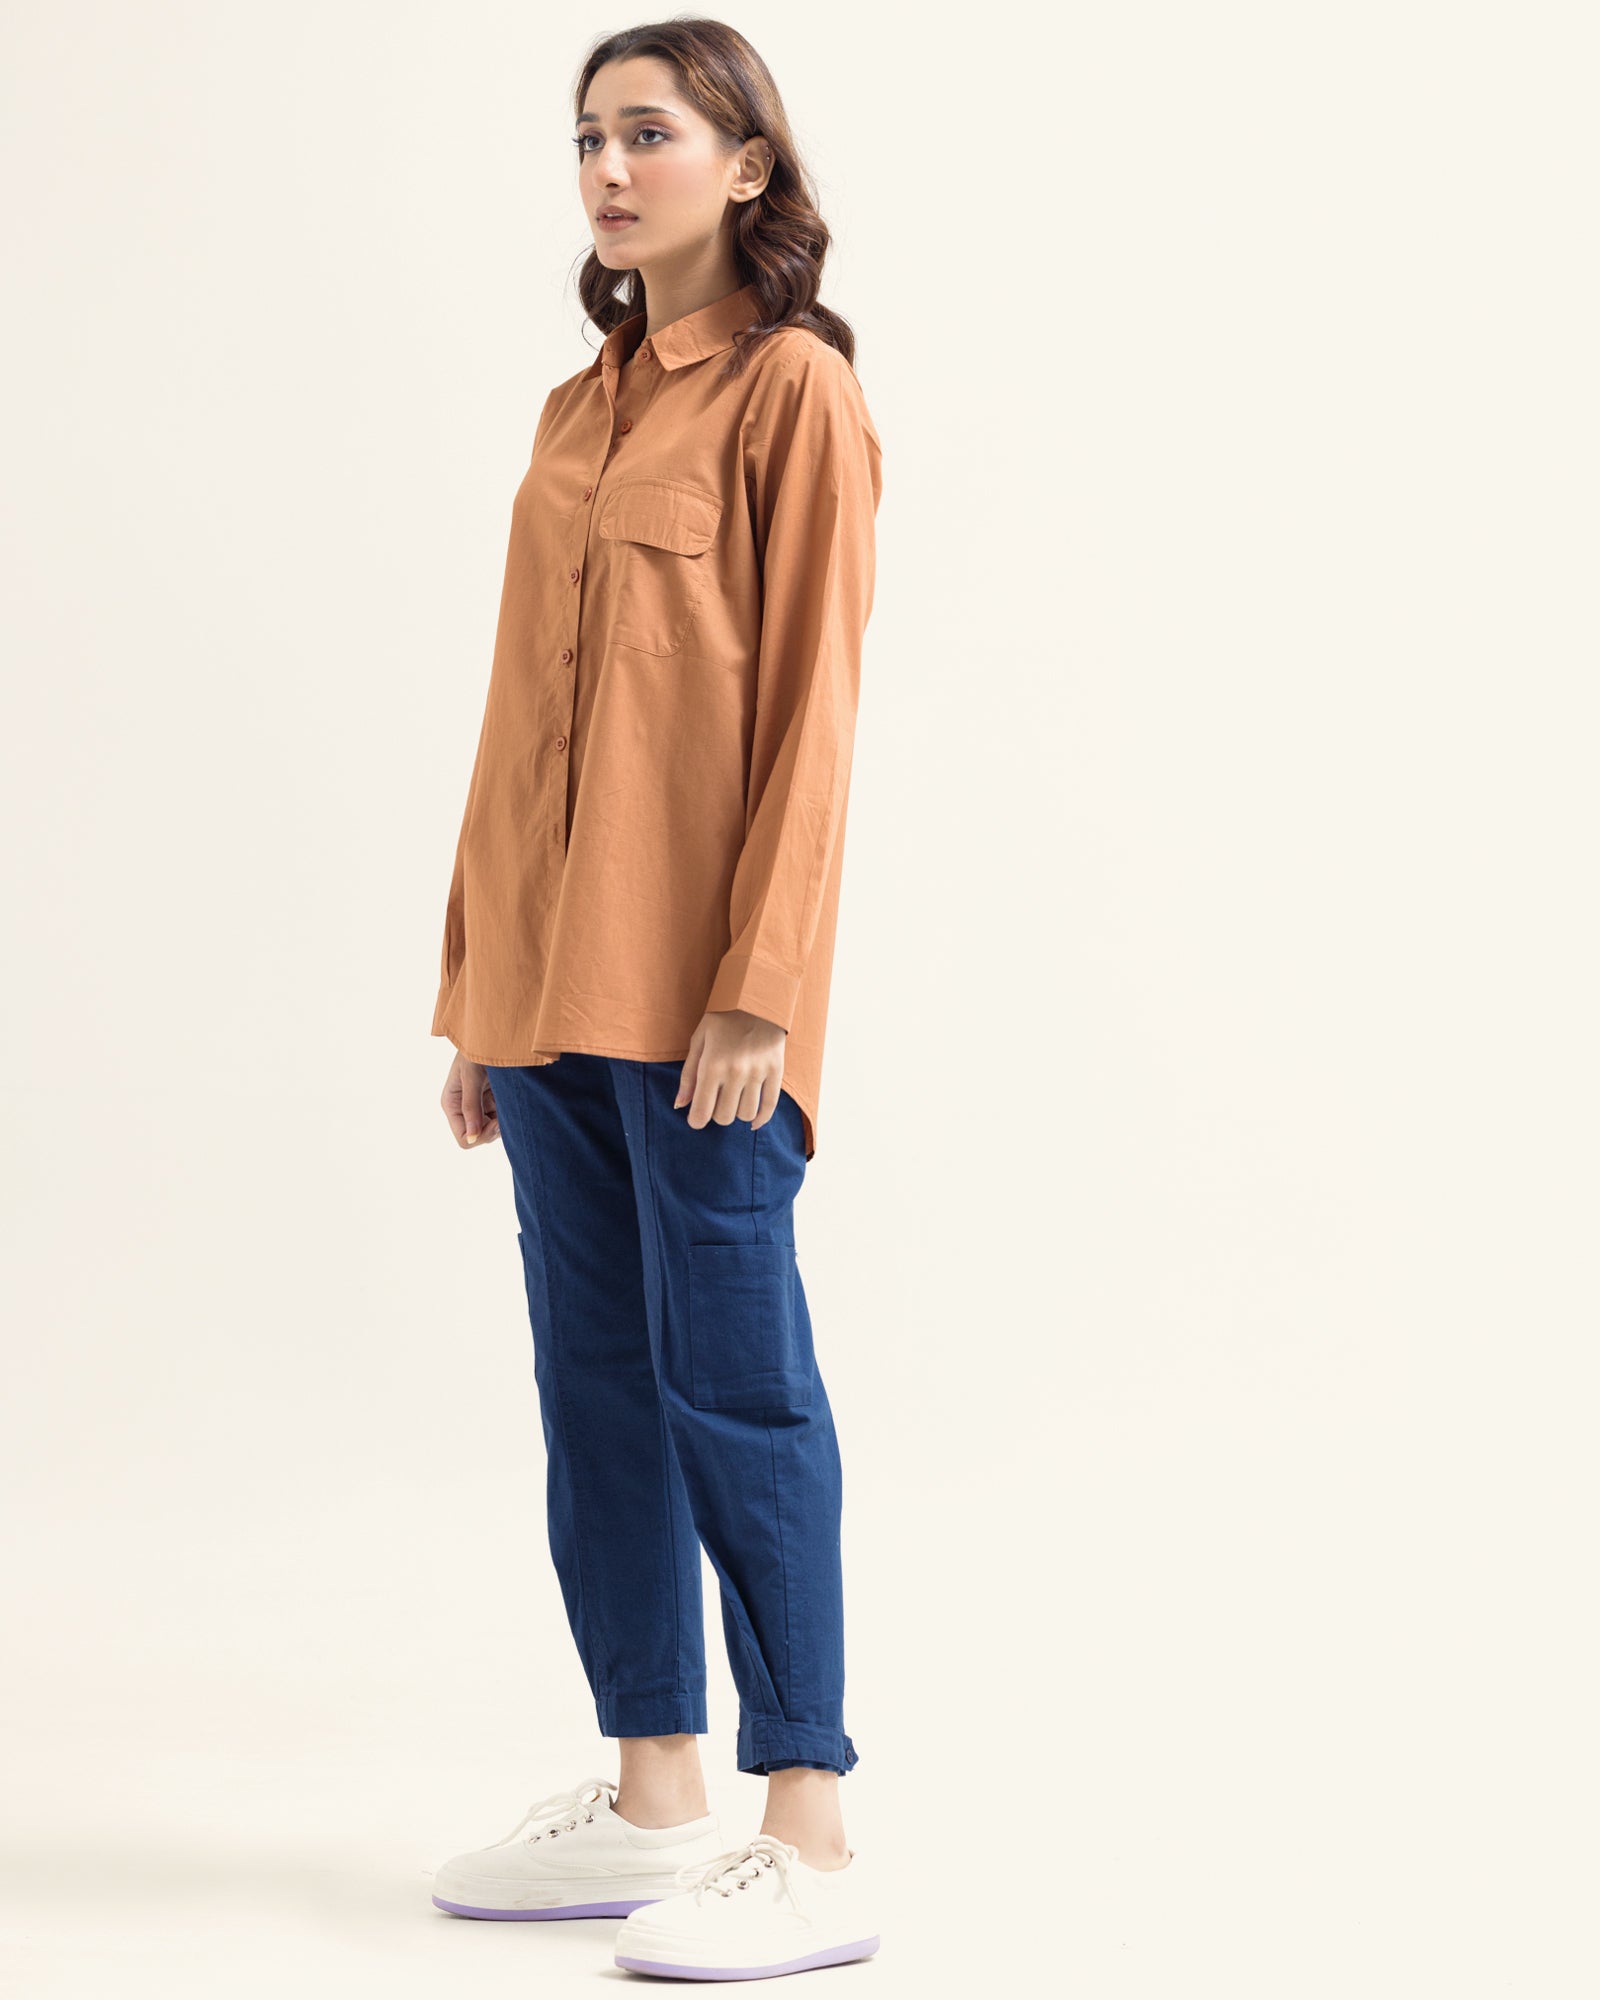 Woven Top For WOMEN - ENGINE